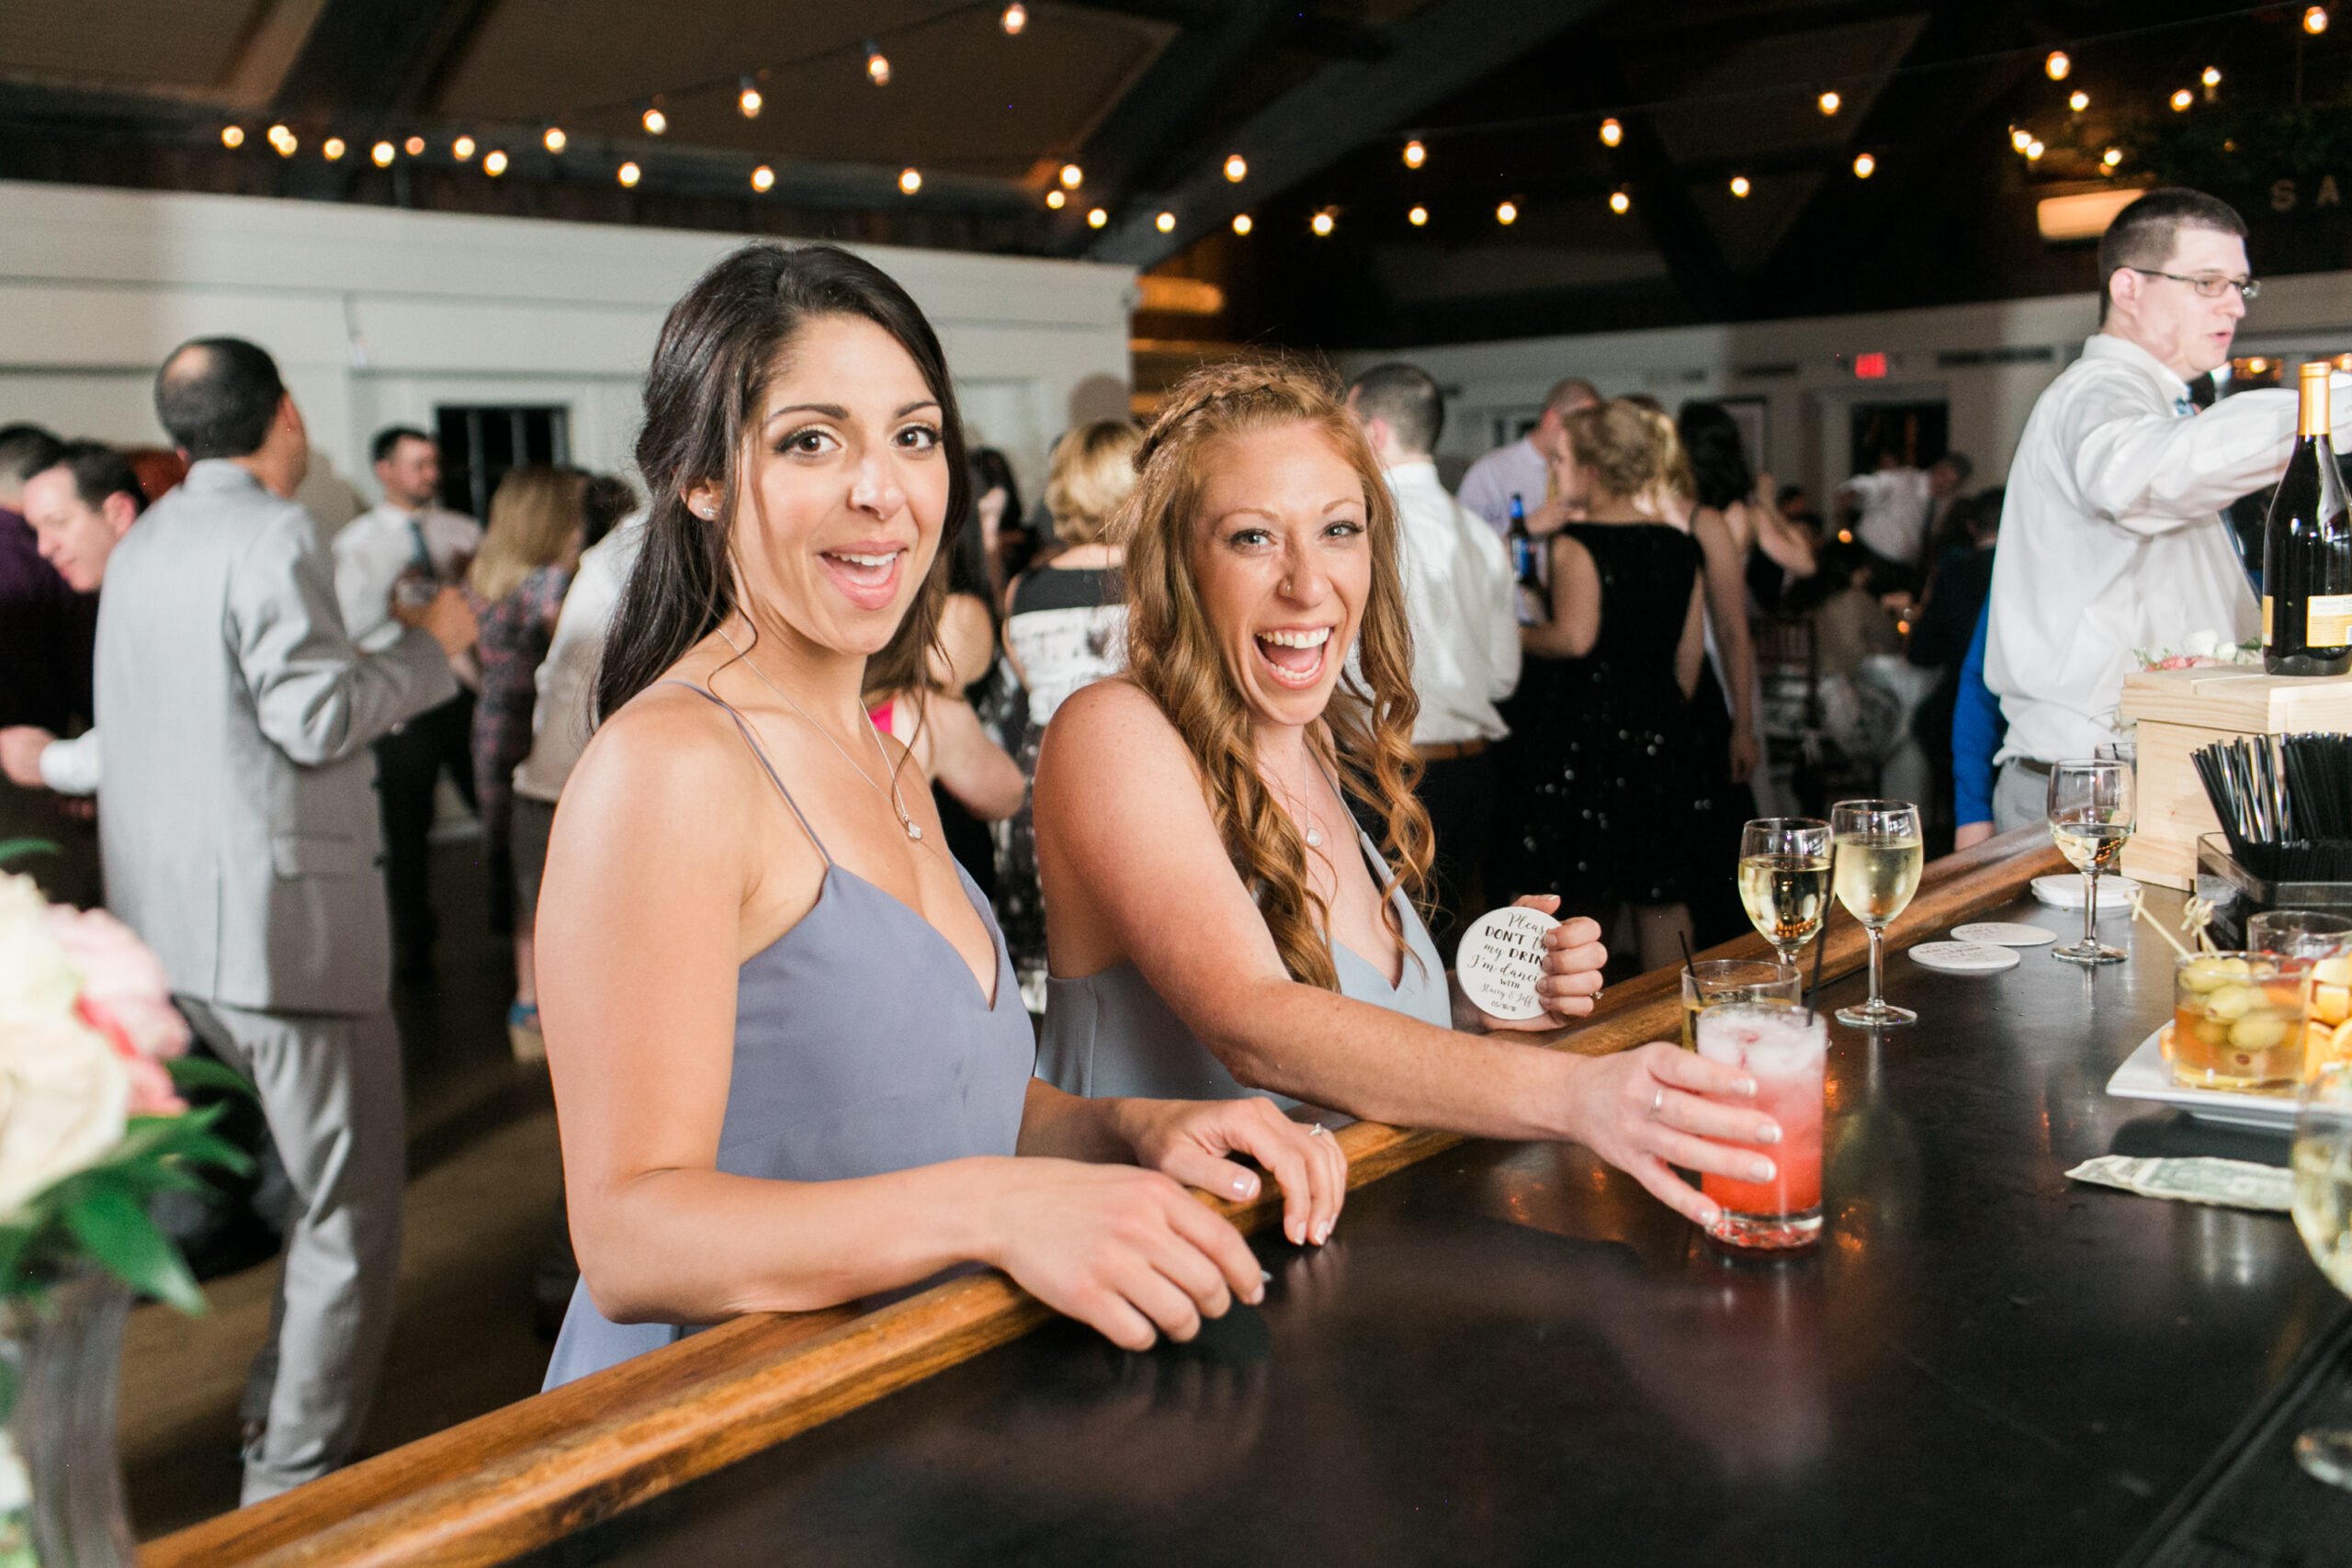 Fun smiling bridesmaids in light blue dresses getting drinks at the bar Latitude 41 Mystic with bar lights hung up in background